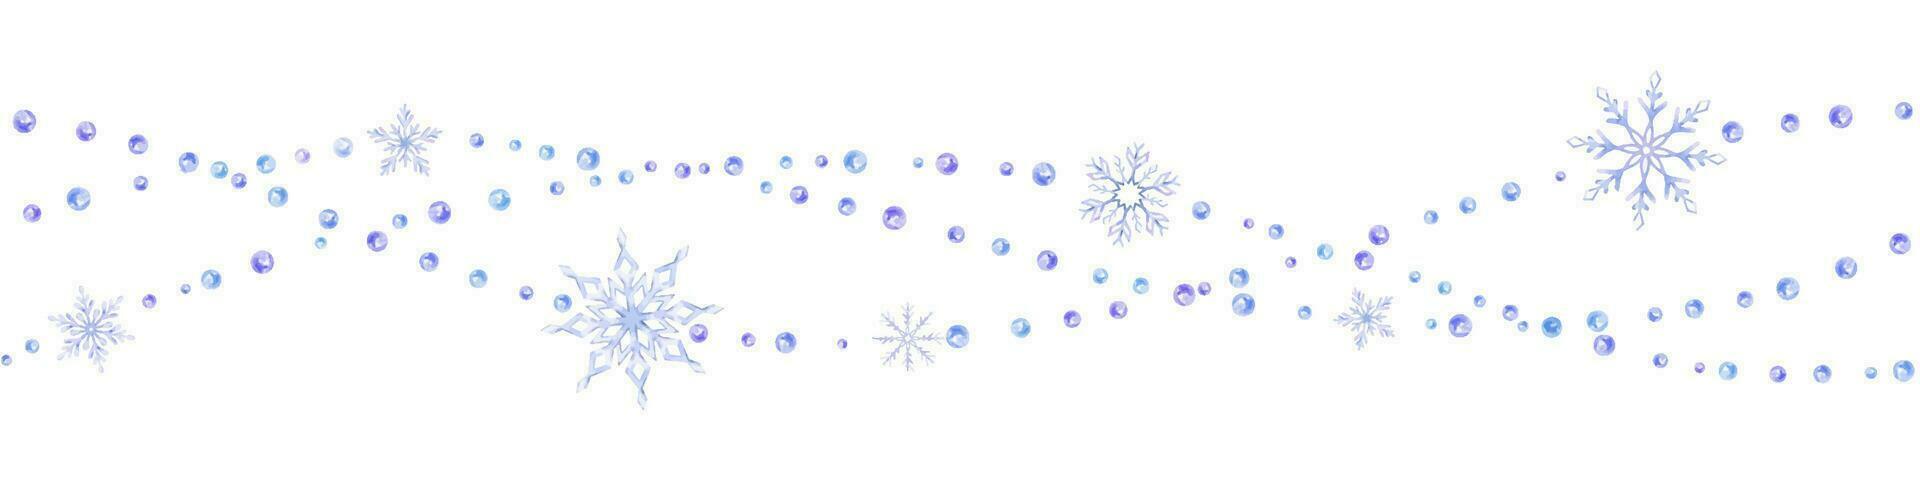 Snowflake, Snow, stars. Seamless border. Watercolor illustration drawn by hands. Isolated. For postcards, invitations, cards vector